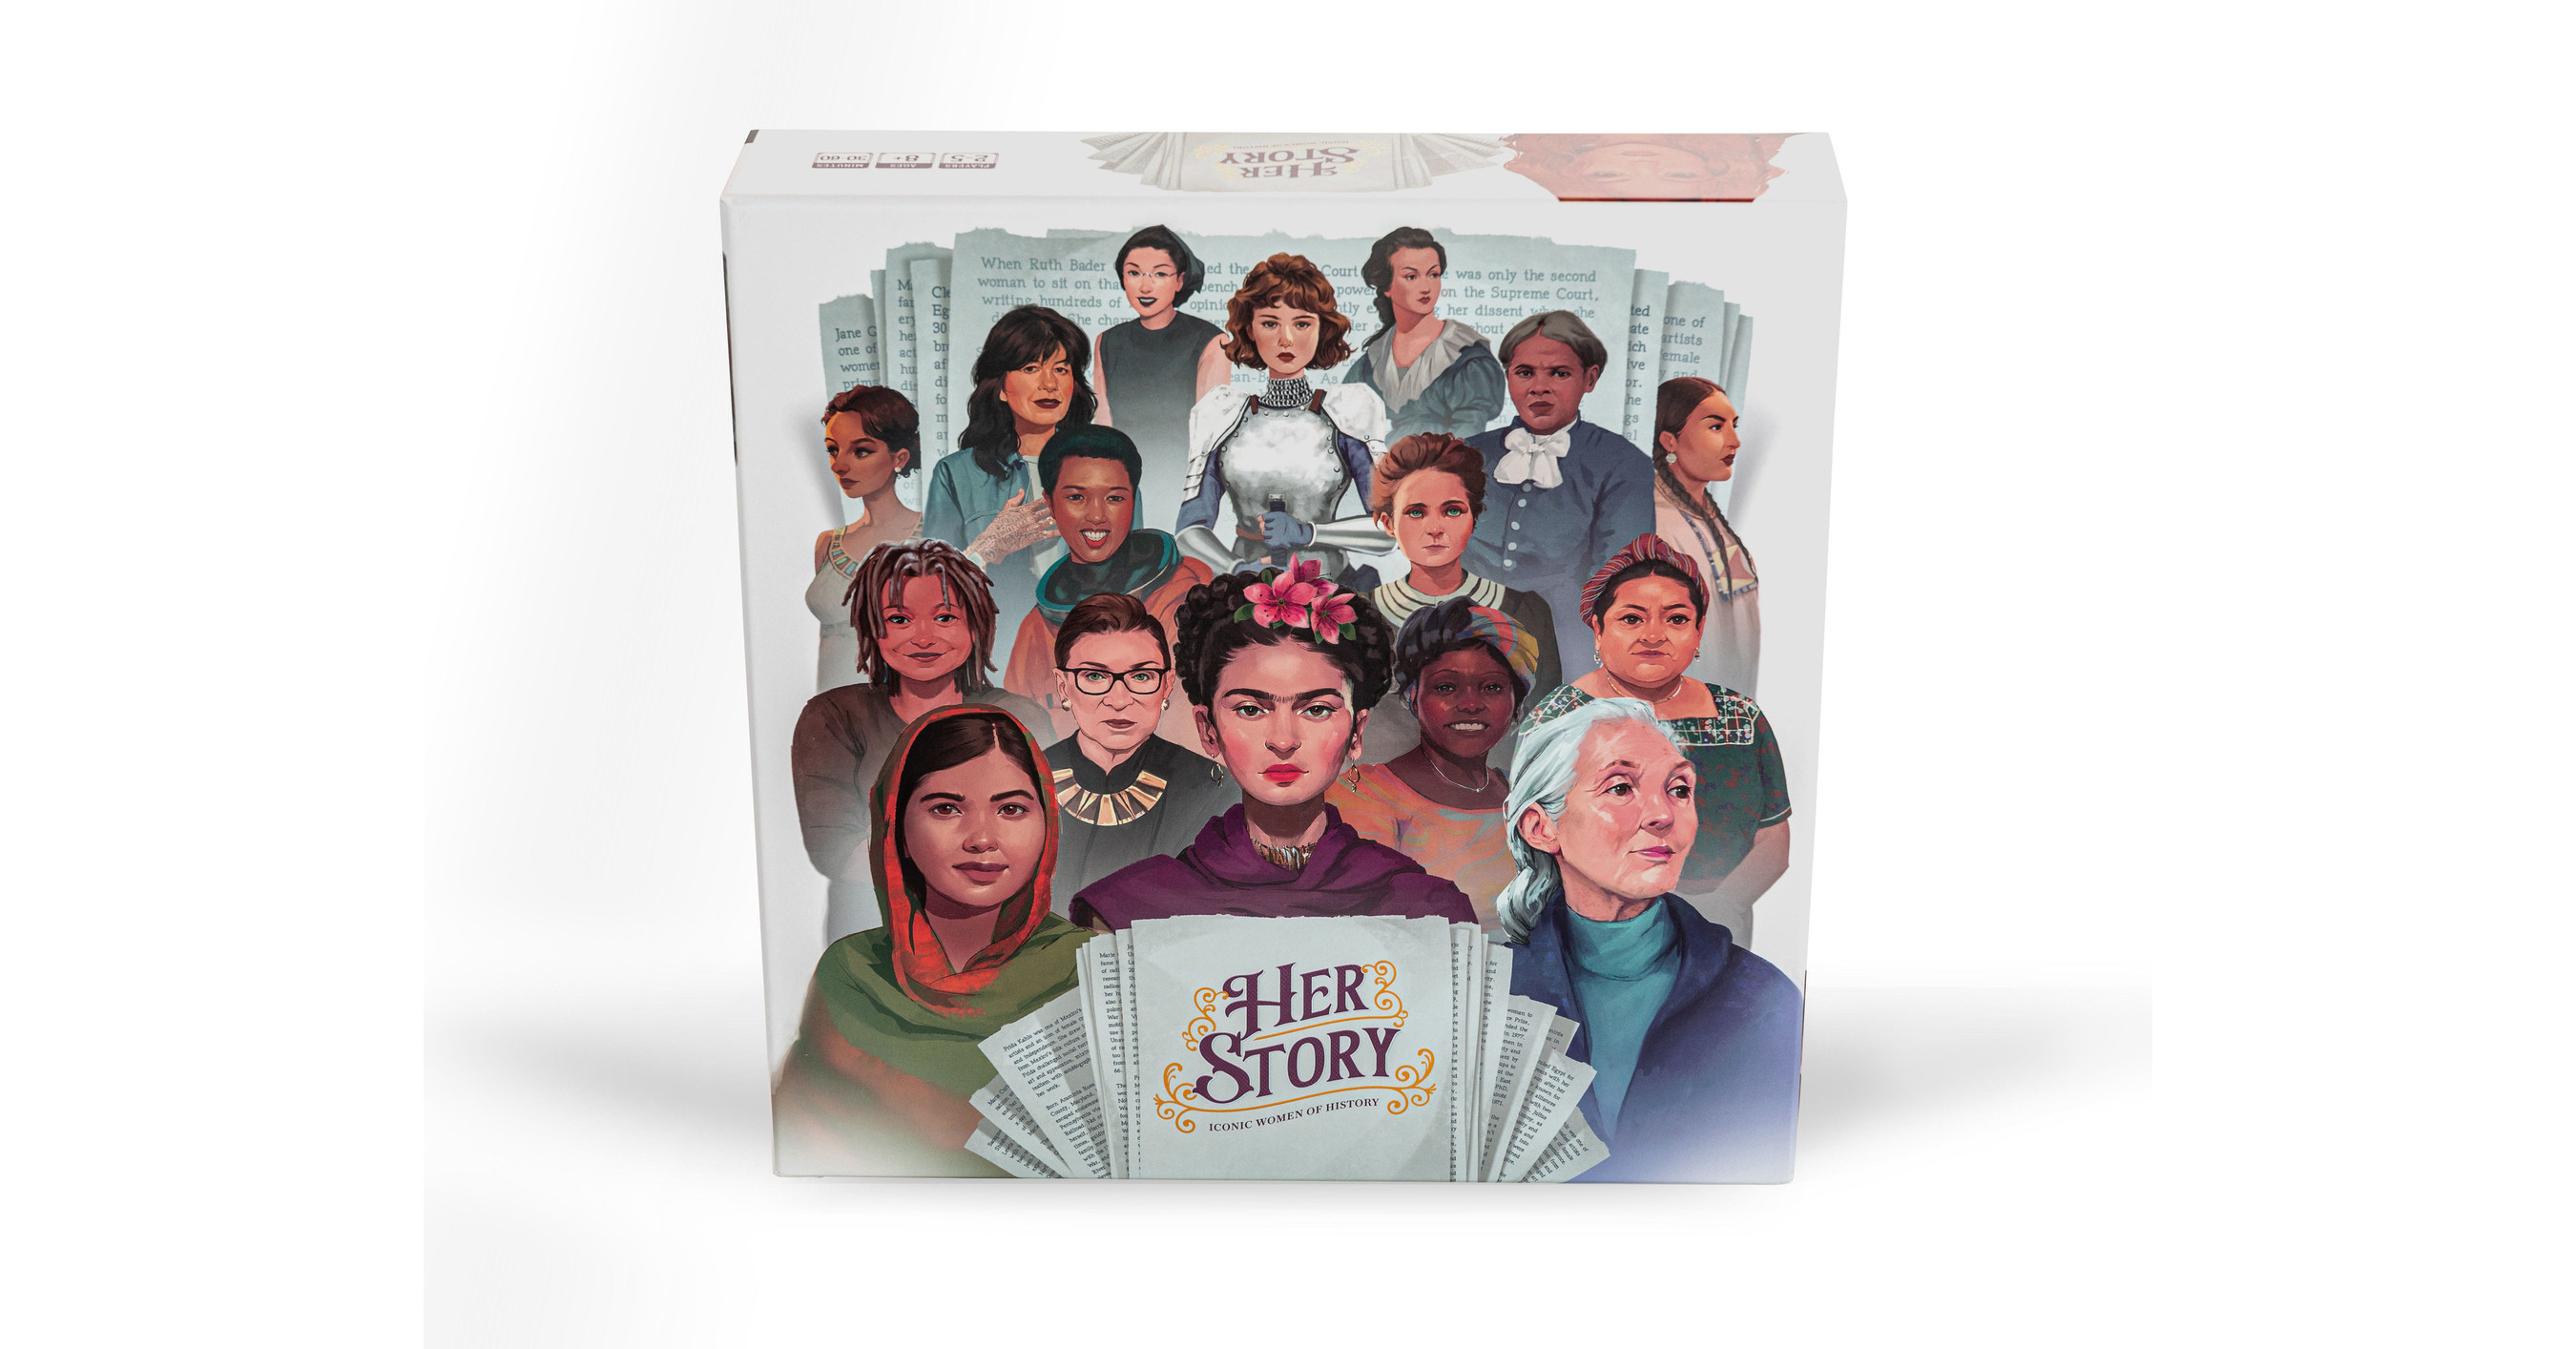 Only 1 Woman for Every 3 Men Are Mentioned in K-12 Standards, and HerStory: The Board Game Wants to Change This